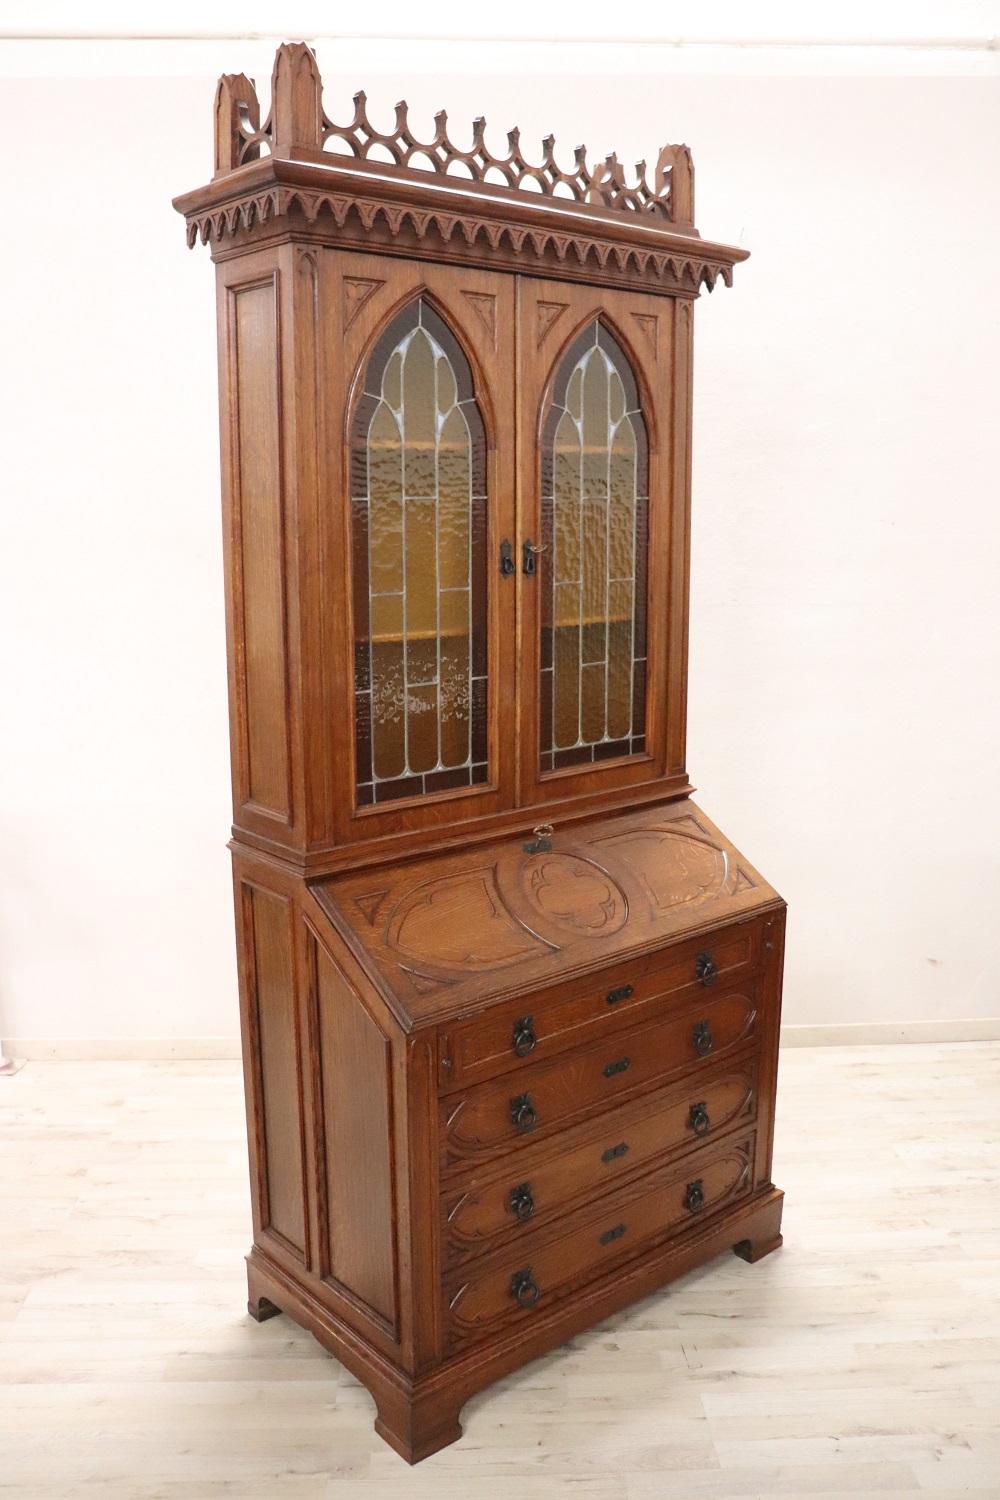 Fantastic Gothic style cabinet made in the first decades of the 20th century. In solid oak wood. Characterized in the upper part by a majestic architectural decoration carved in wood. The two colored cathedral glasses are of great value. This